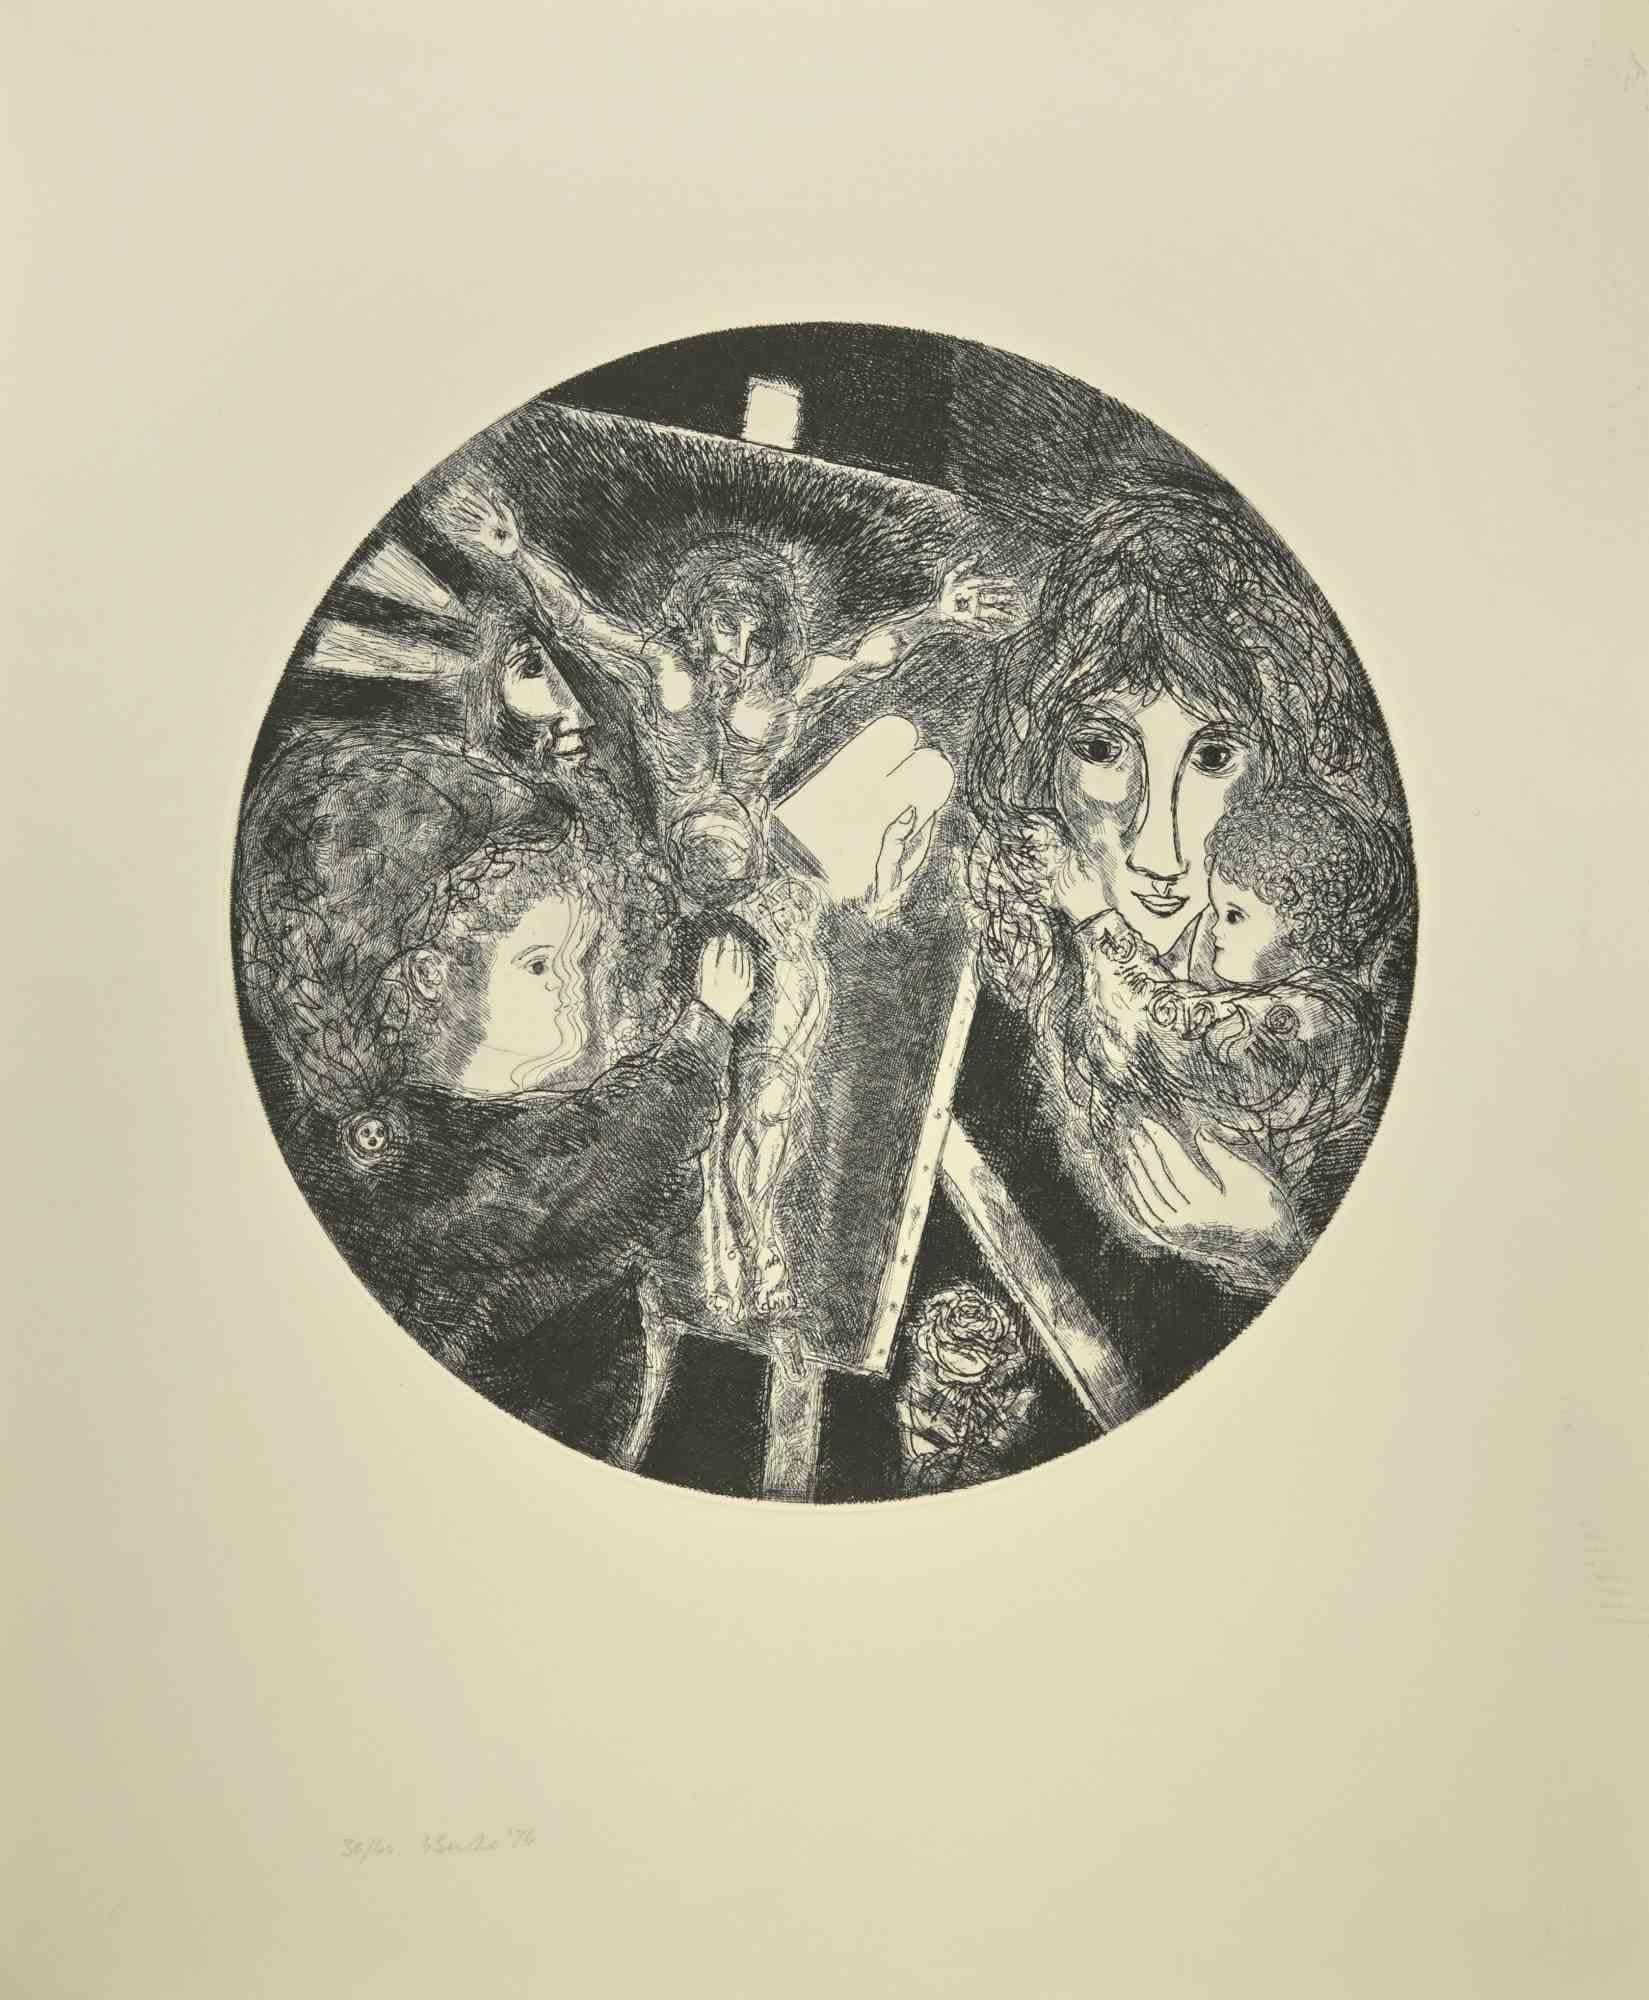 The Crucifixion is an etching and drypoint on paper realized by  Gian Paolo Berto in 1974.

Good conditions.

Hand-signed and numbered, edition of 40 prints.

The artwork represents  The Crucifixion.  The artwork is depicted skillfully through